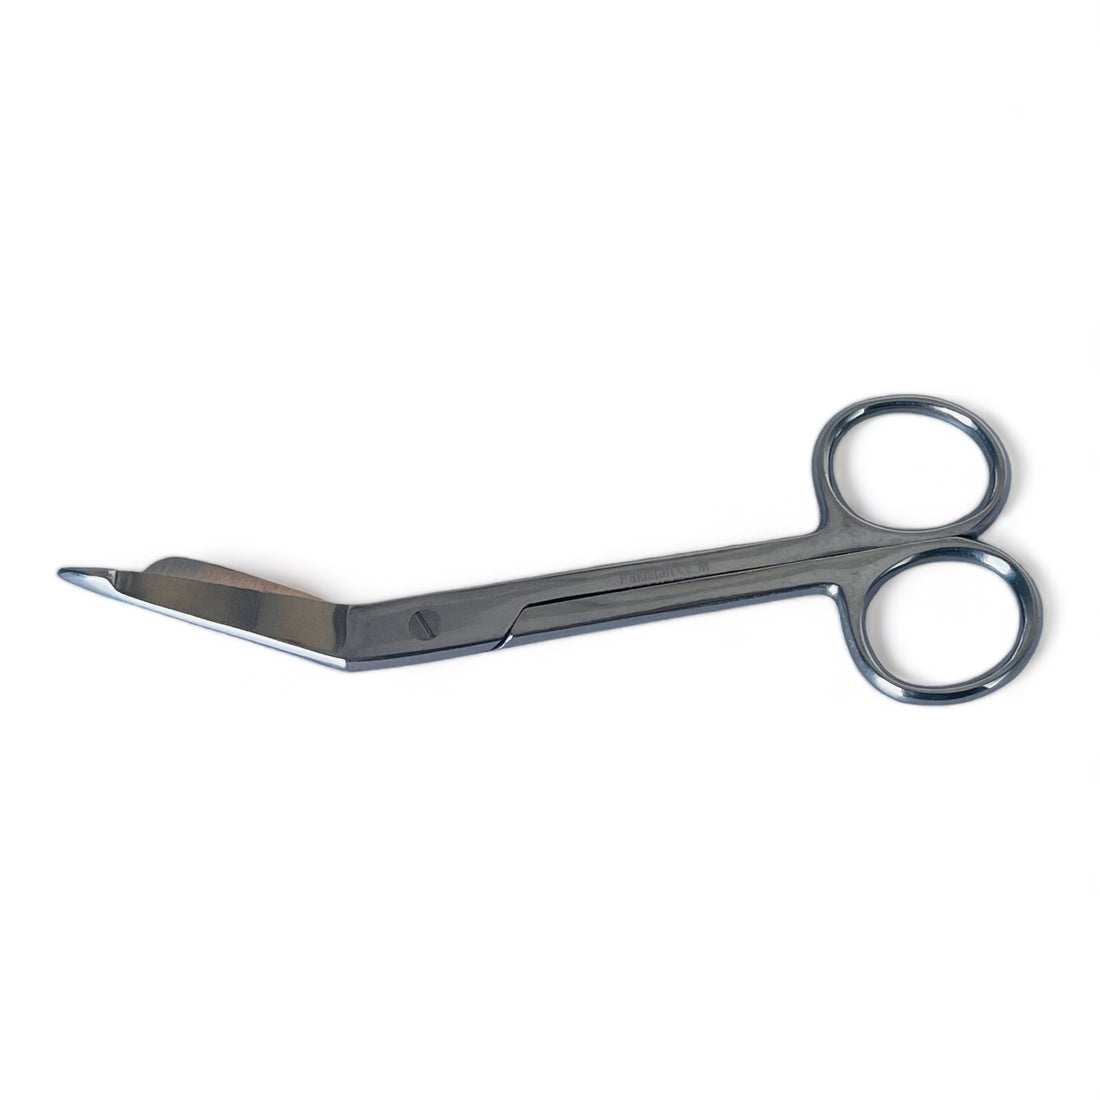 Medical Bandage Scissors for First Aid Use - China Bandage Scissors, First  Aid Kit Scissors